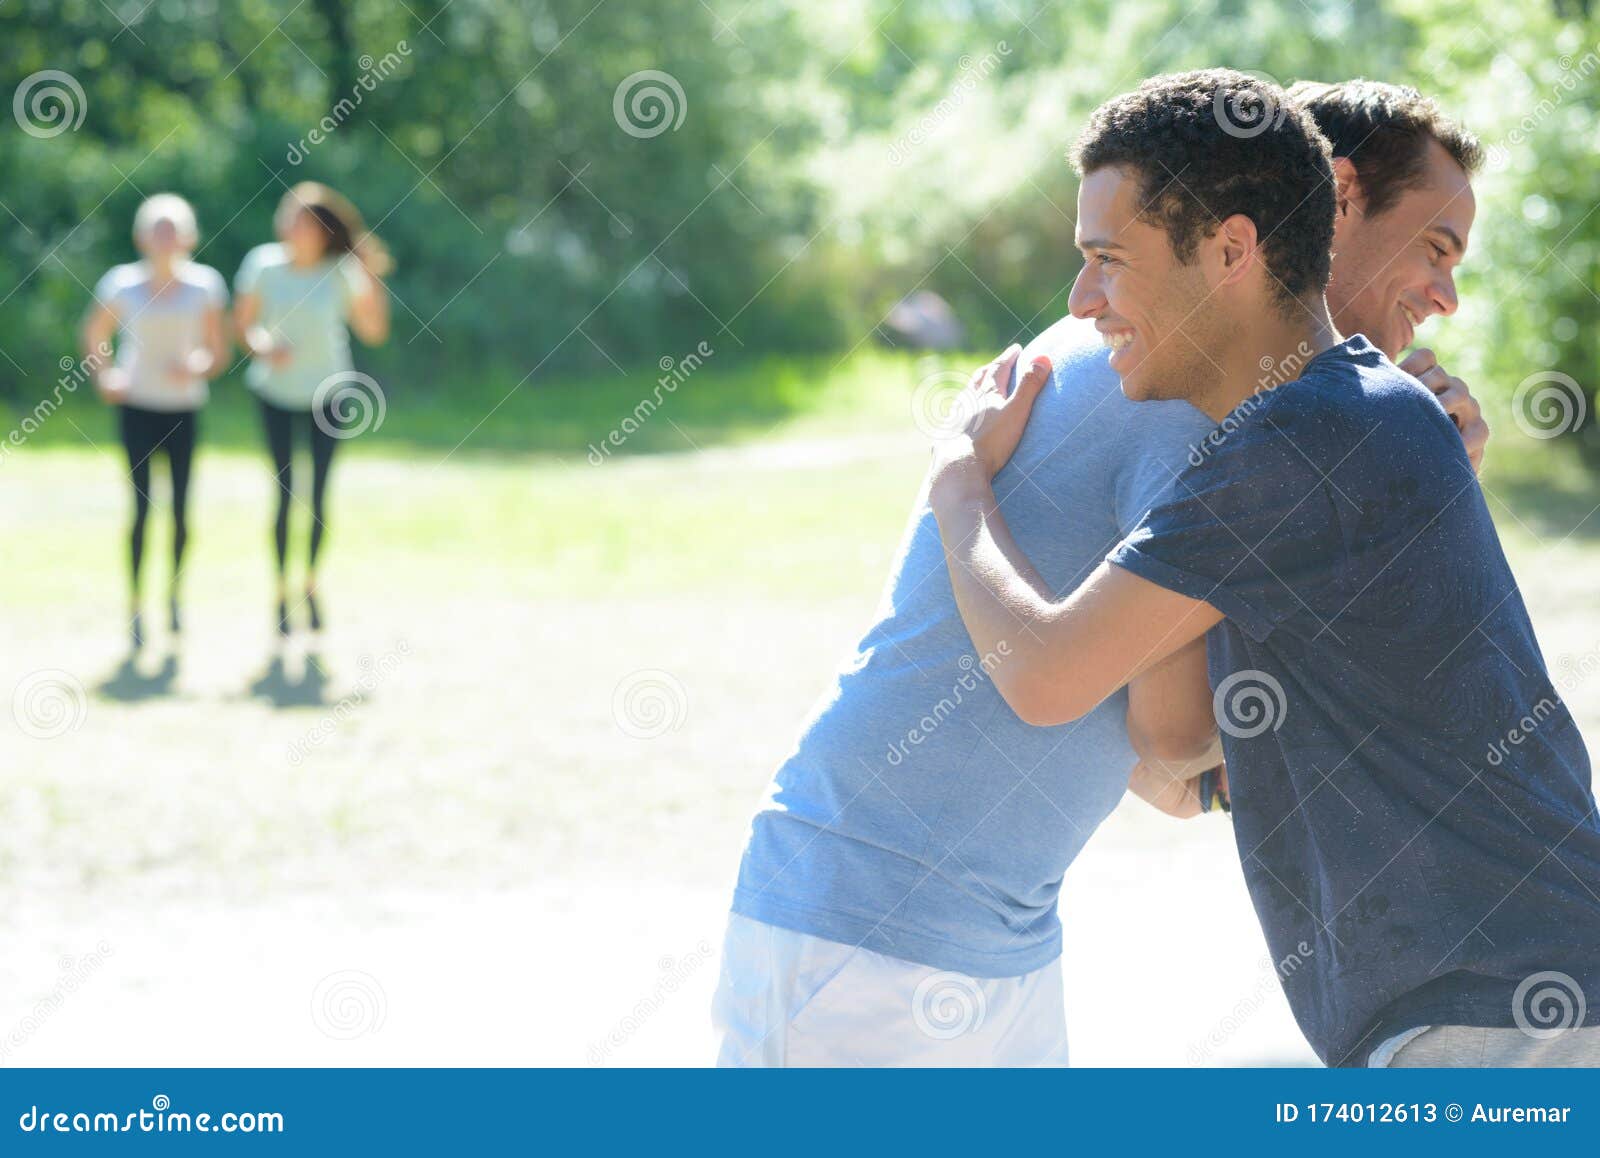 Two Young Sportmen Giving Eachother Hug Stock Image - Image of park ...